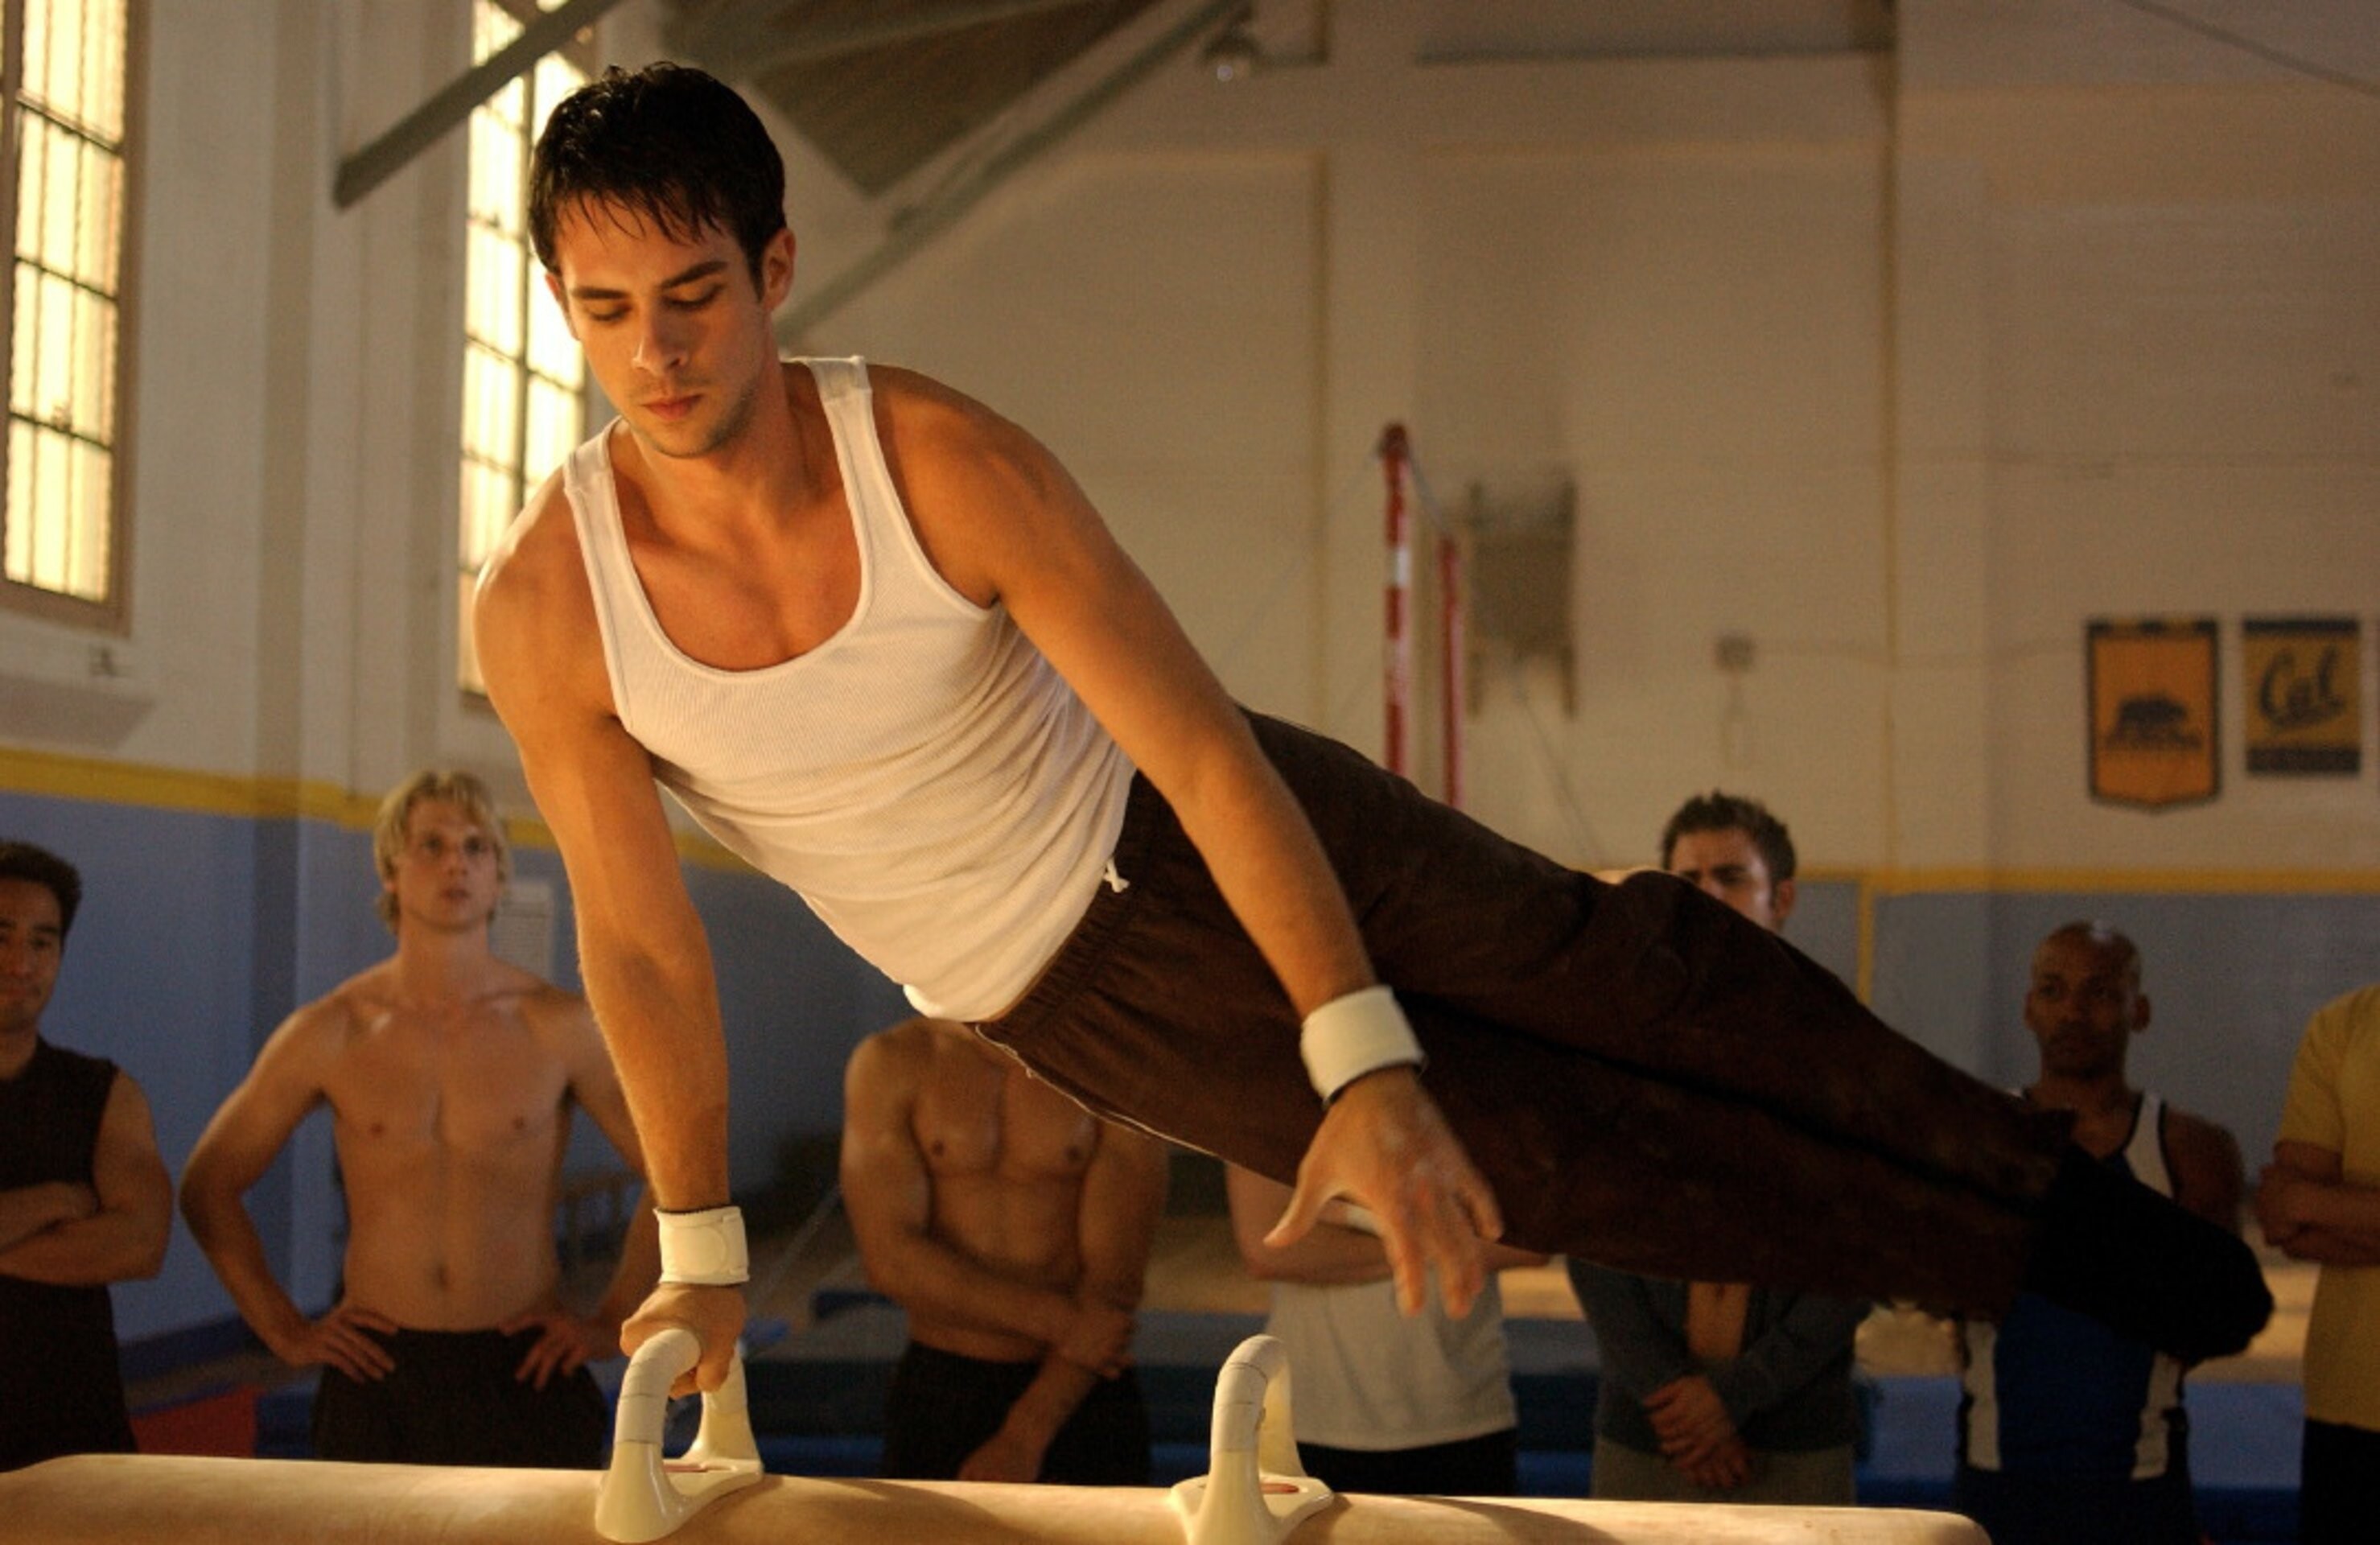 Peaceful Warrior, Spirituality in sport, Life's challenges, Pursuit of excellence, 2960x1920 HD Desktop